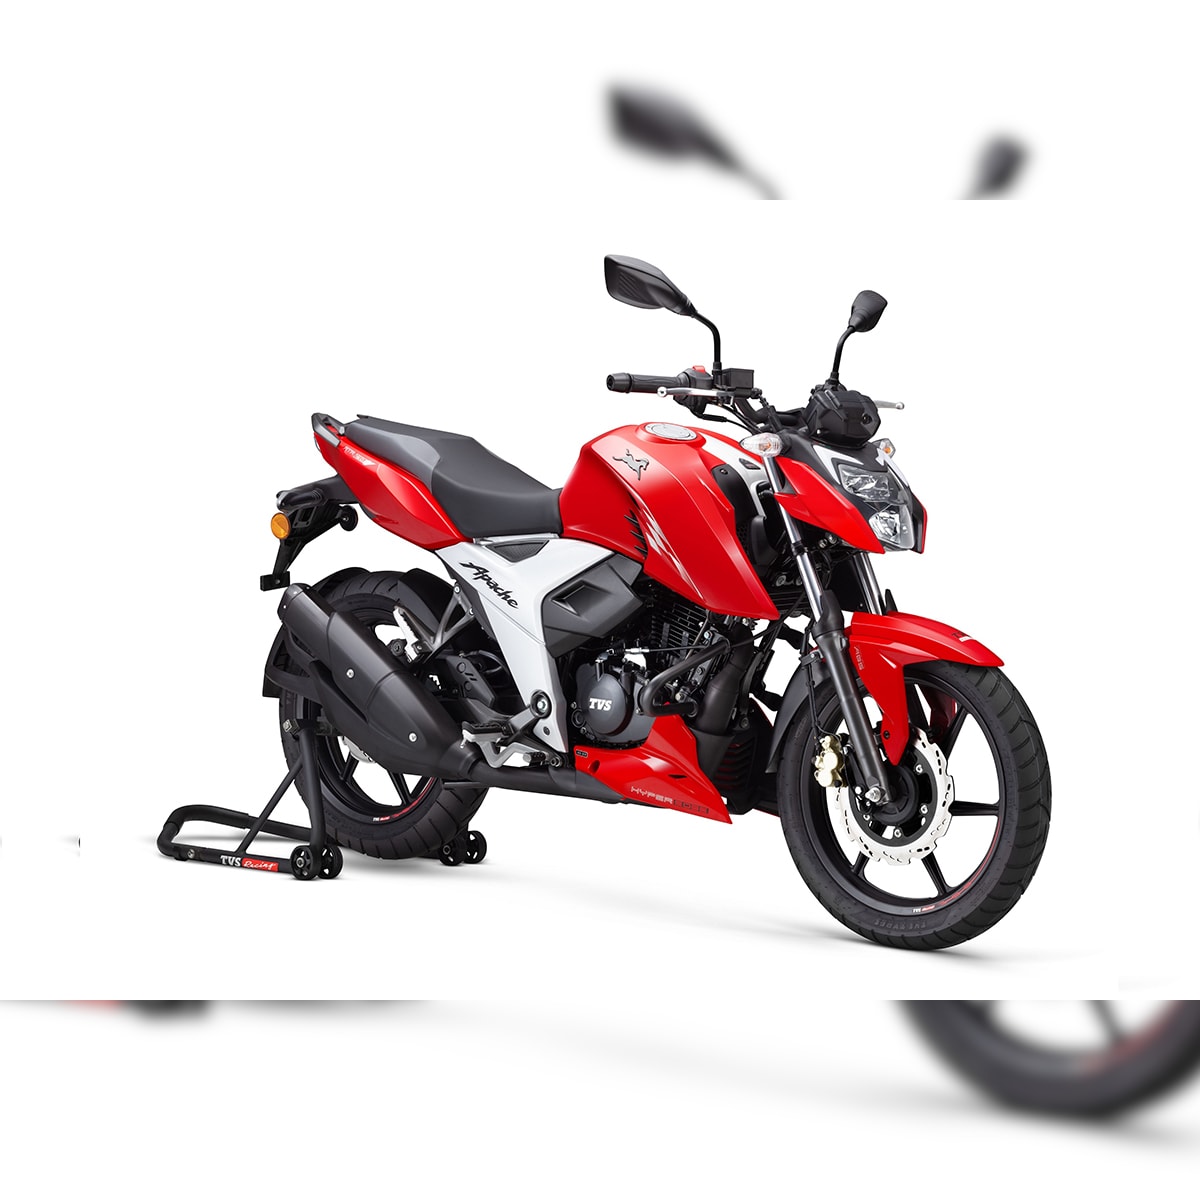 21 Tvs Apache Rtr 160 4v Launched At Rs 1 07 Lakh Becomes The Most Powerful In The Segment